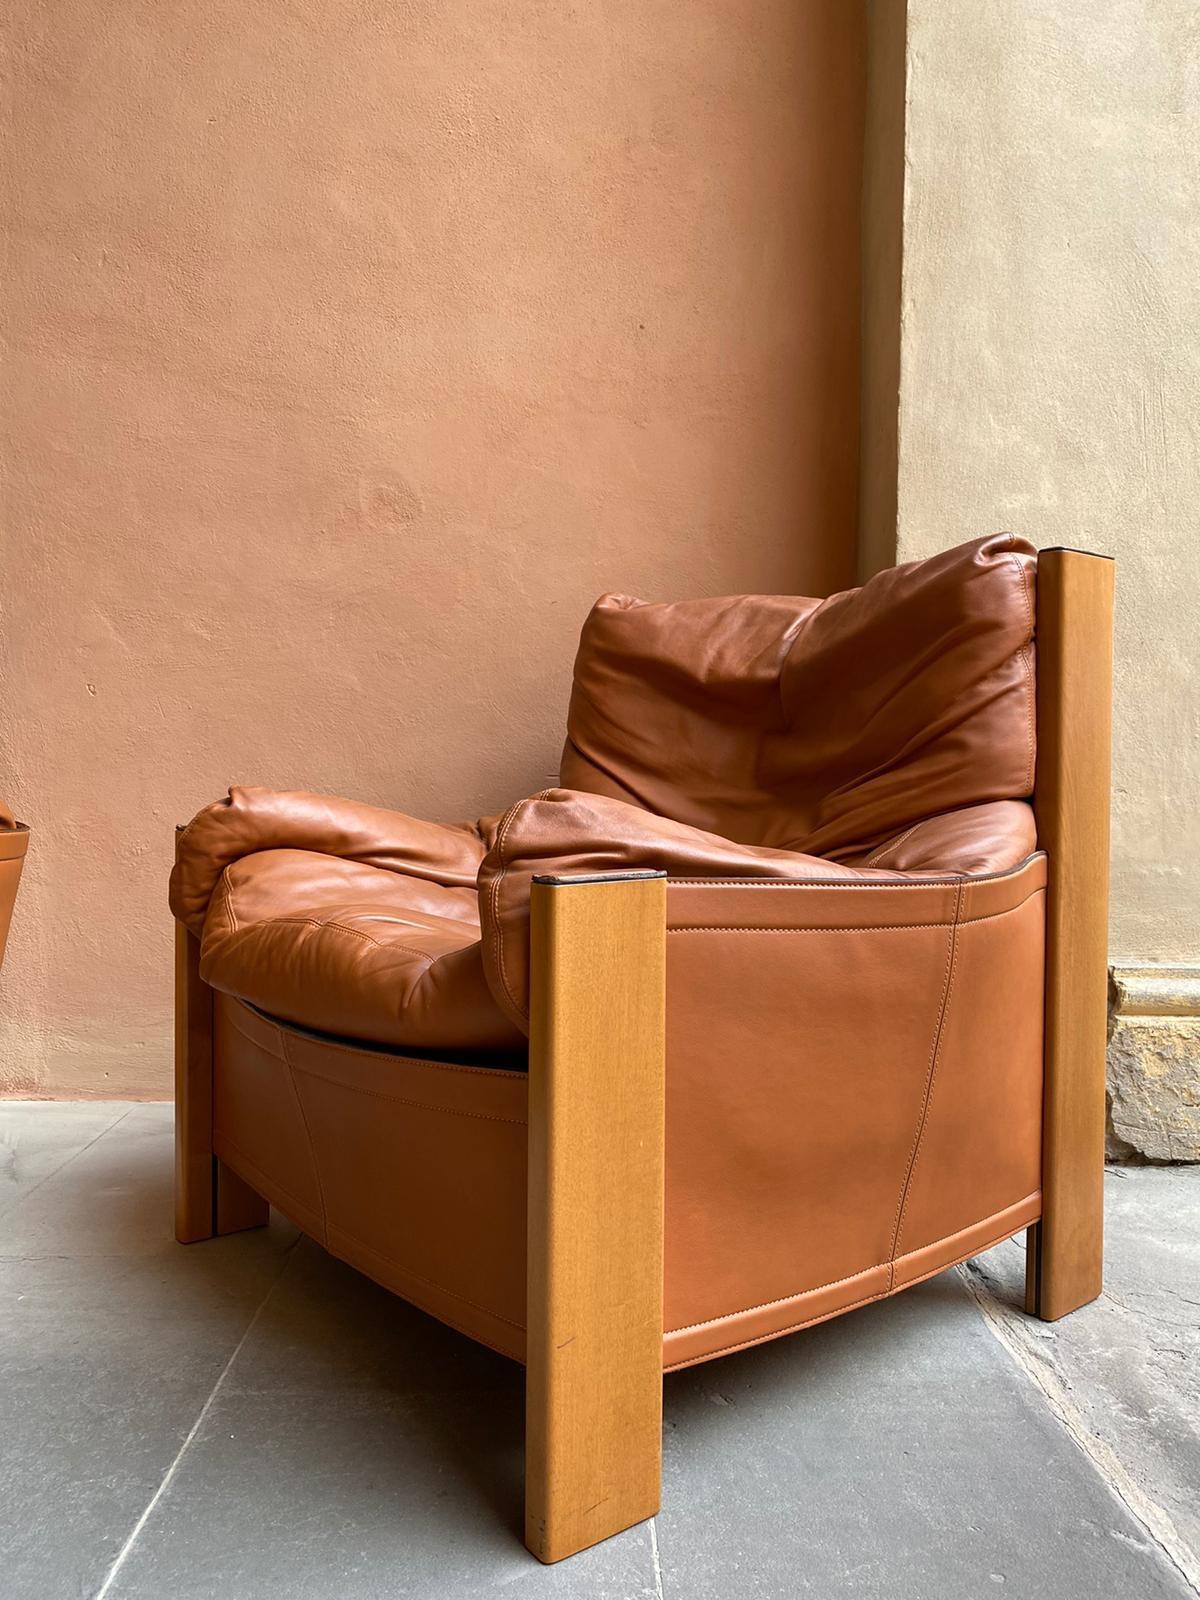 Rare pair of armchairs or lounge chairs model Bergere in leather with saddle stitching and wood by Tobia and Afra Scarpa for the quality editor Maxalto. Famous design like Gio Ponti, Gianfranco Frattini, Cassina, Osvaldo Borsani, Joe Colombo, Vico